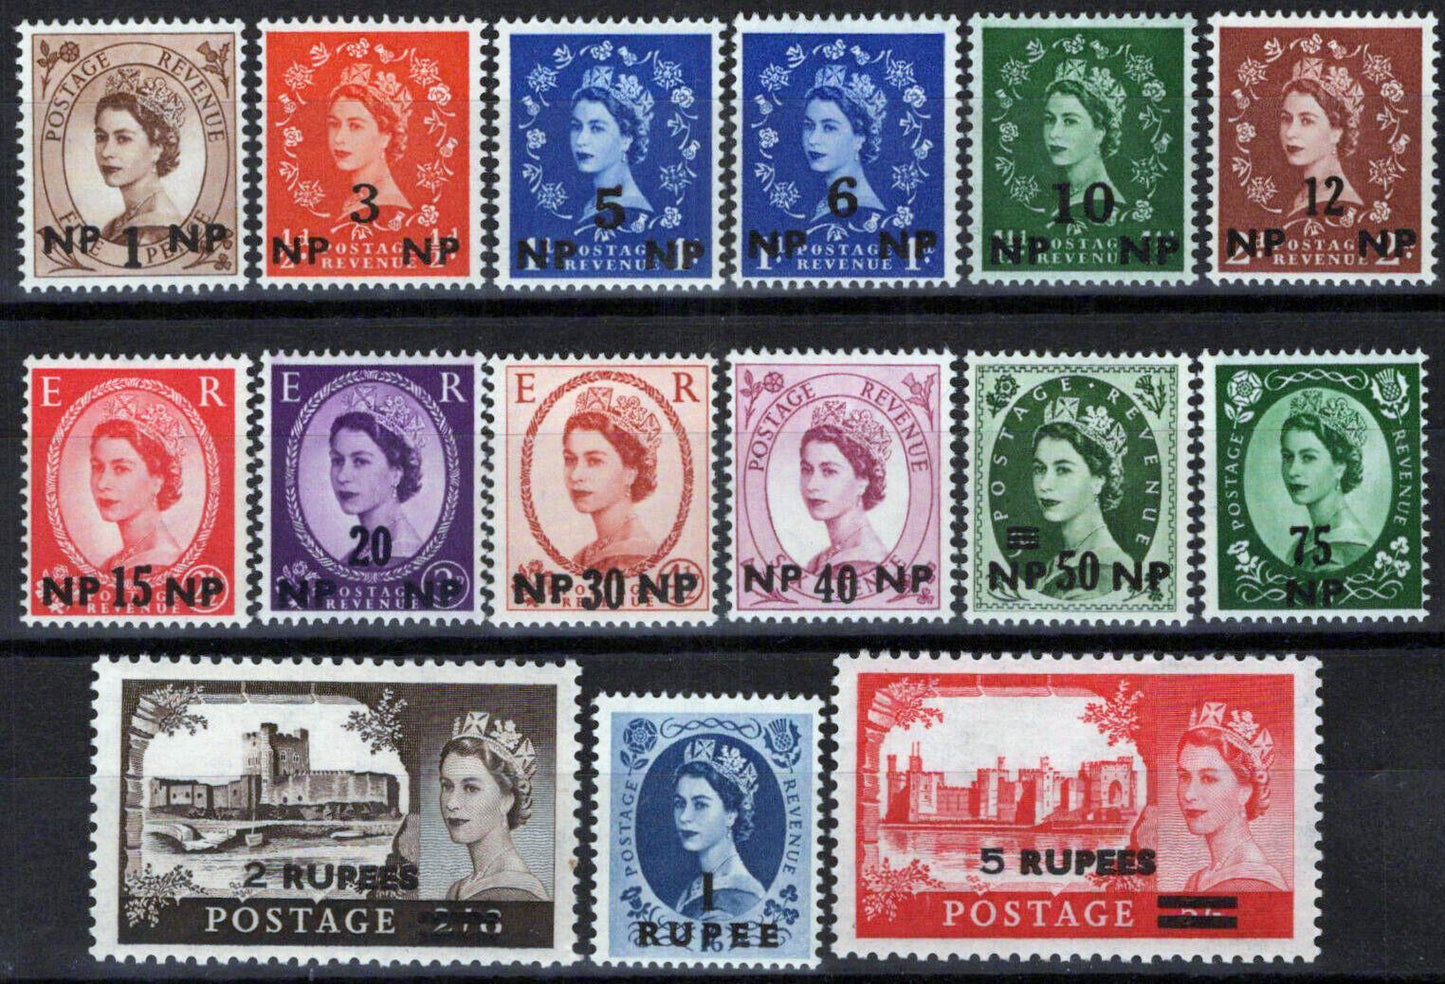 ZAYIX 1960-1961 Oman 79-93 MNH Surcharges on Great Britain Definitives 032723S56